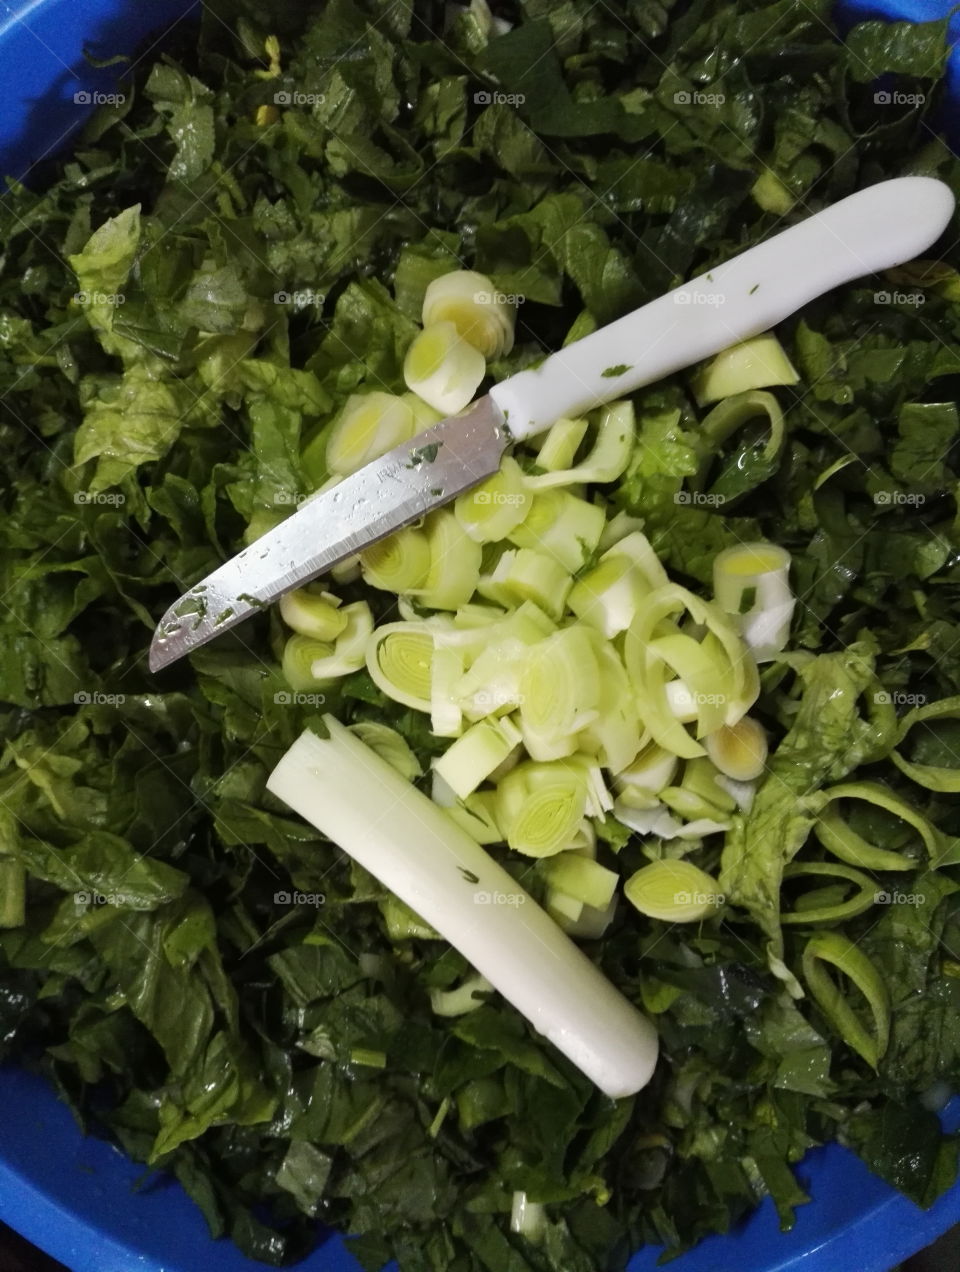 green cut vegetables in a blue bowl with knife